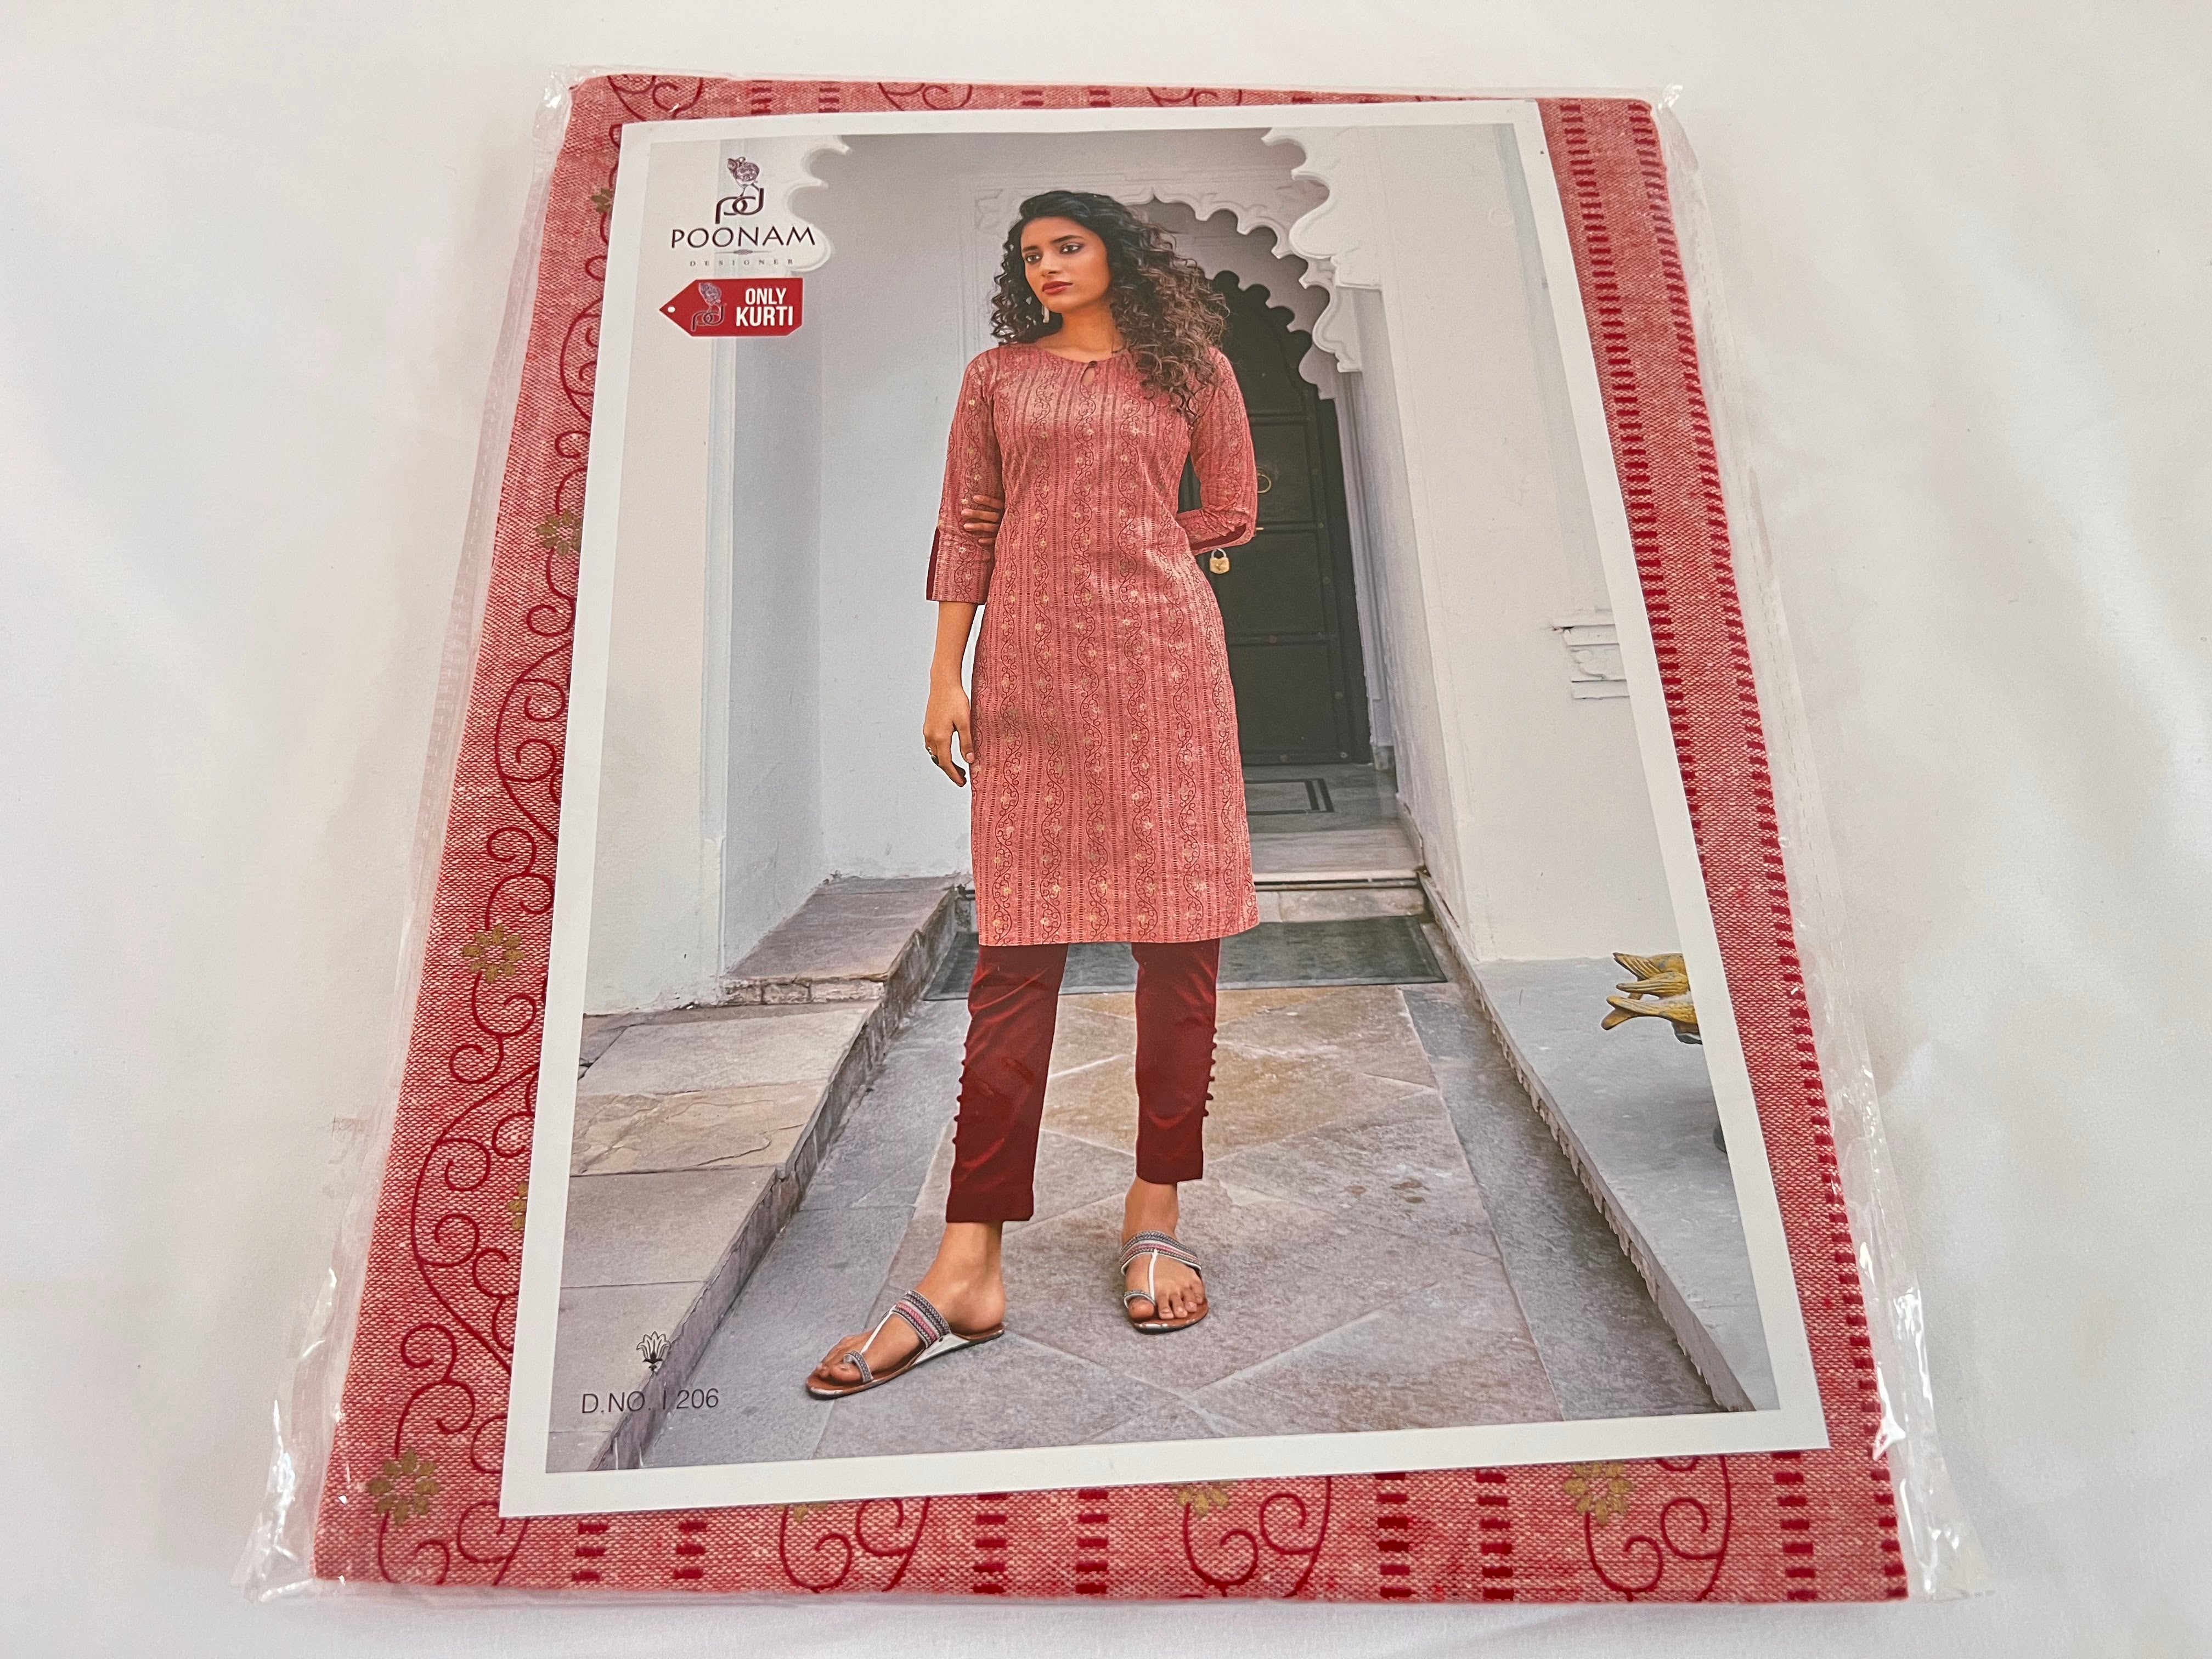 Cotton Printed Tunic Kurti - Straight Style - Knee Length - Light Red Color  Large